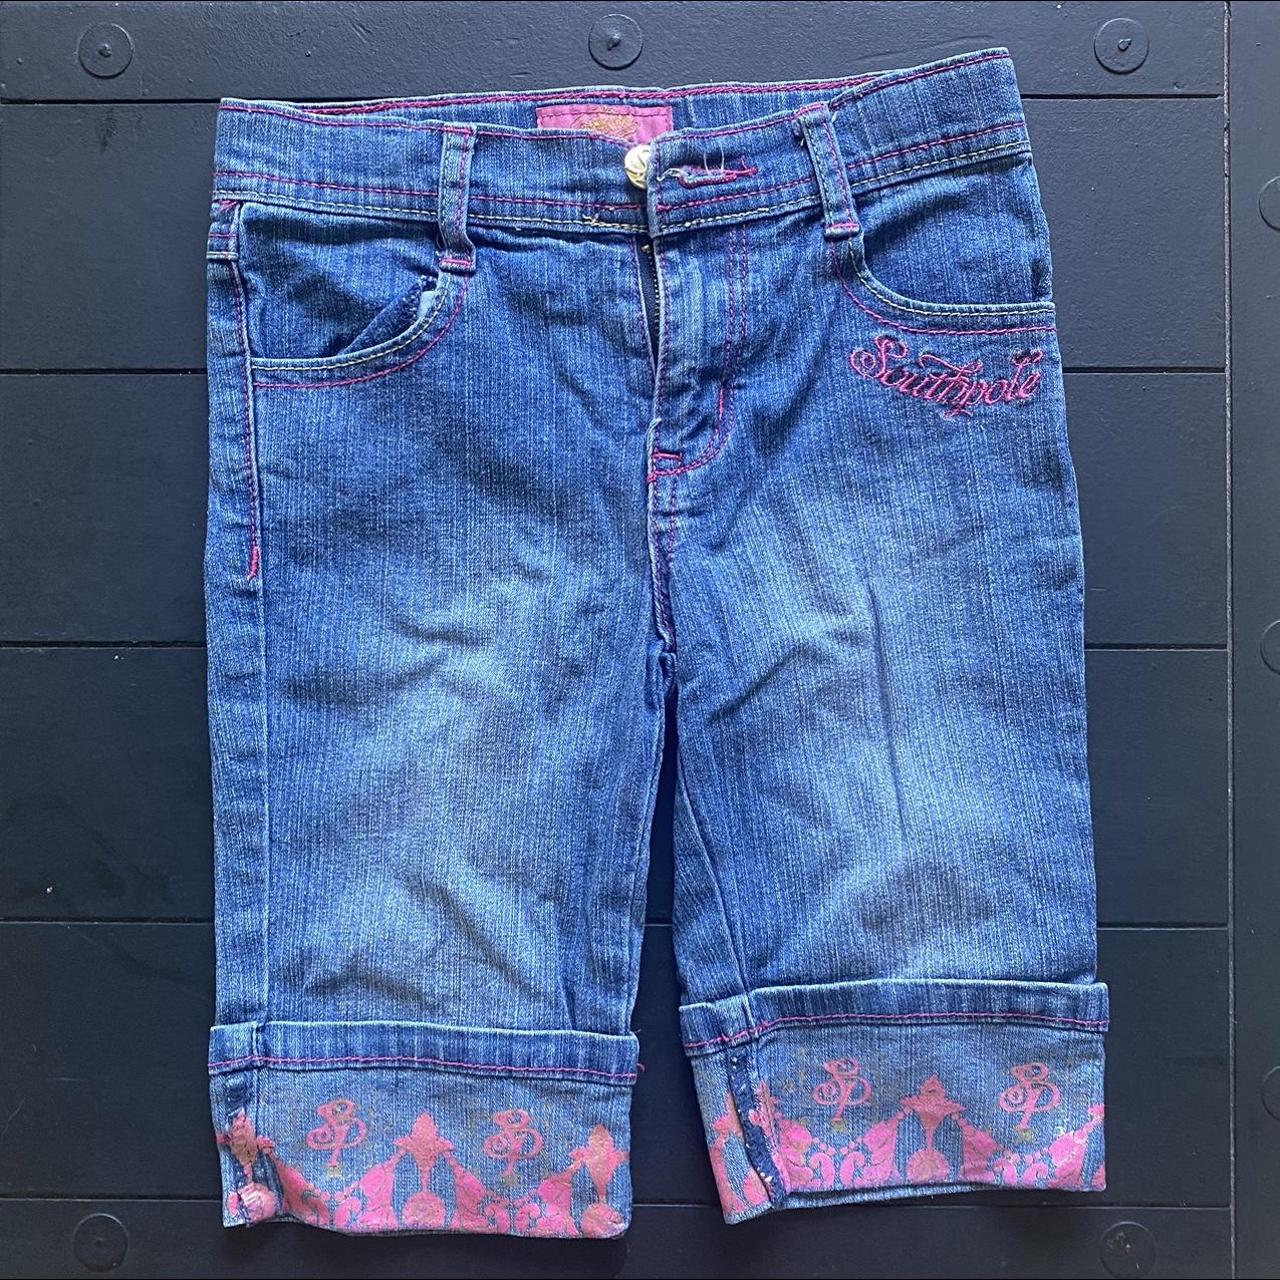 Southpole Blue and Pink Shorts | Depop